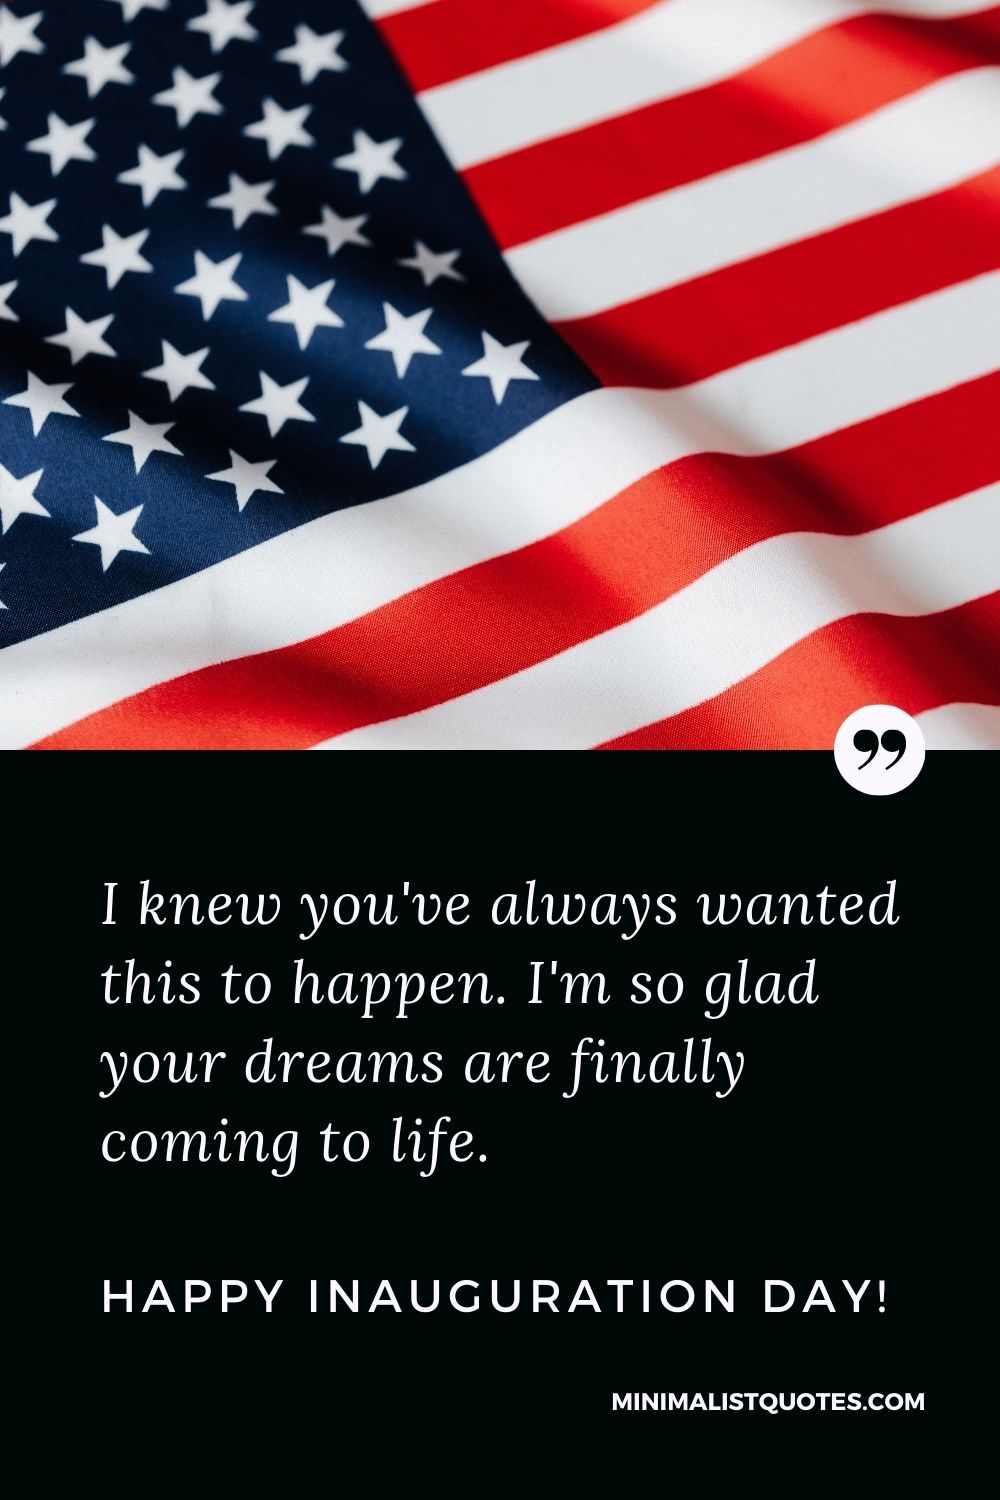 Inauguration Day Quote, Wish & Message With Image: I knew you've always wanted this to happen. I'm so glad your dreams are finally coming to life. Happy Inauguration Day!